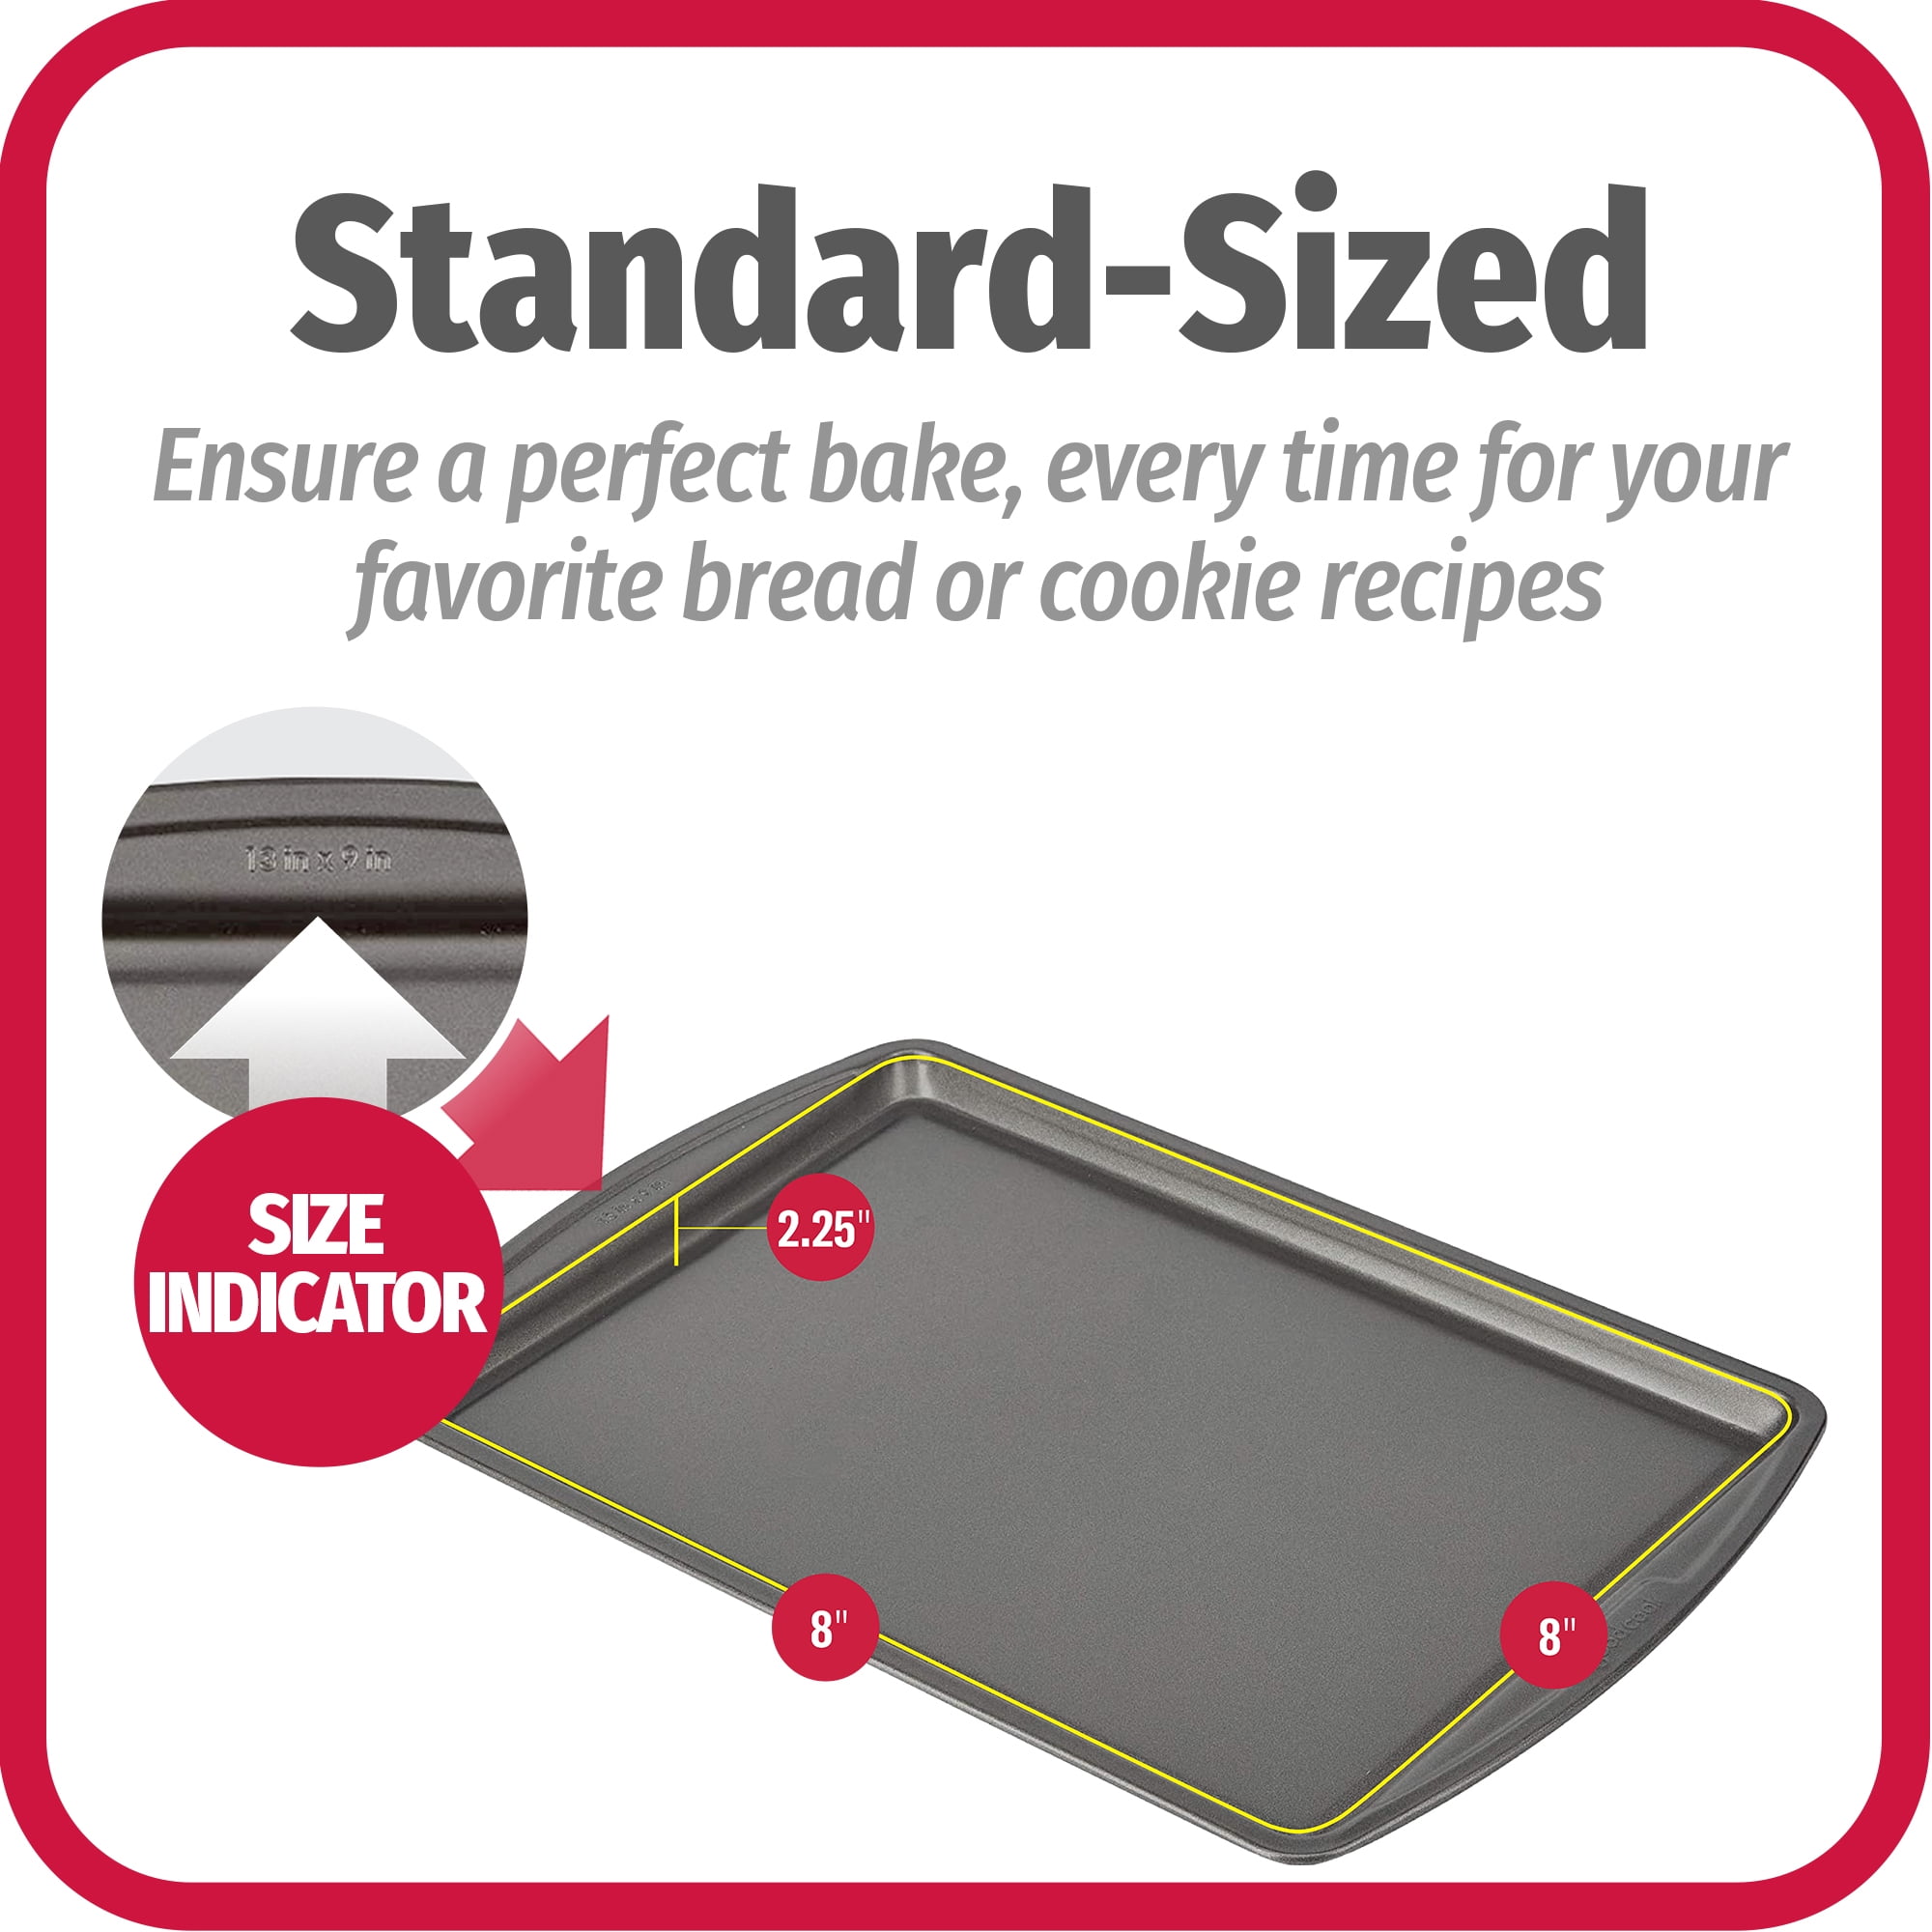 Can anyone ID what this baking sheet is for? : r/Baking